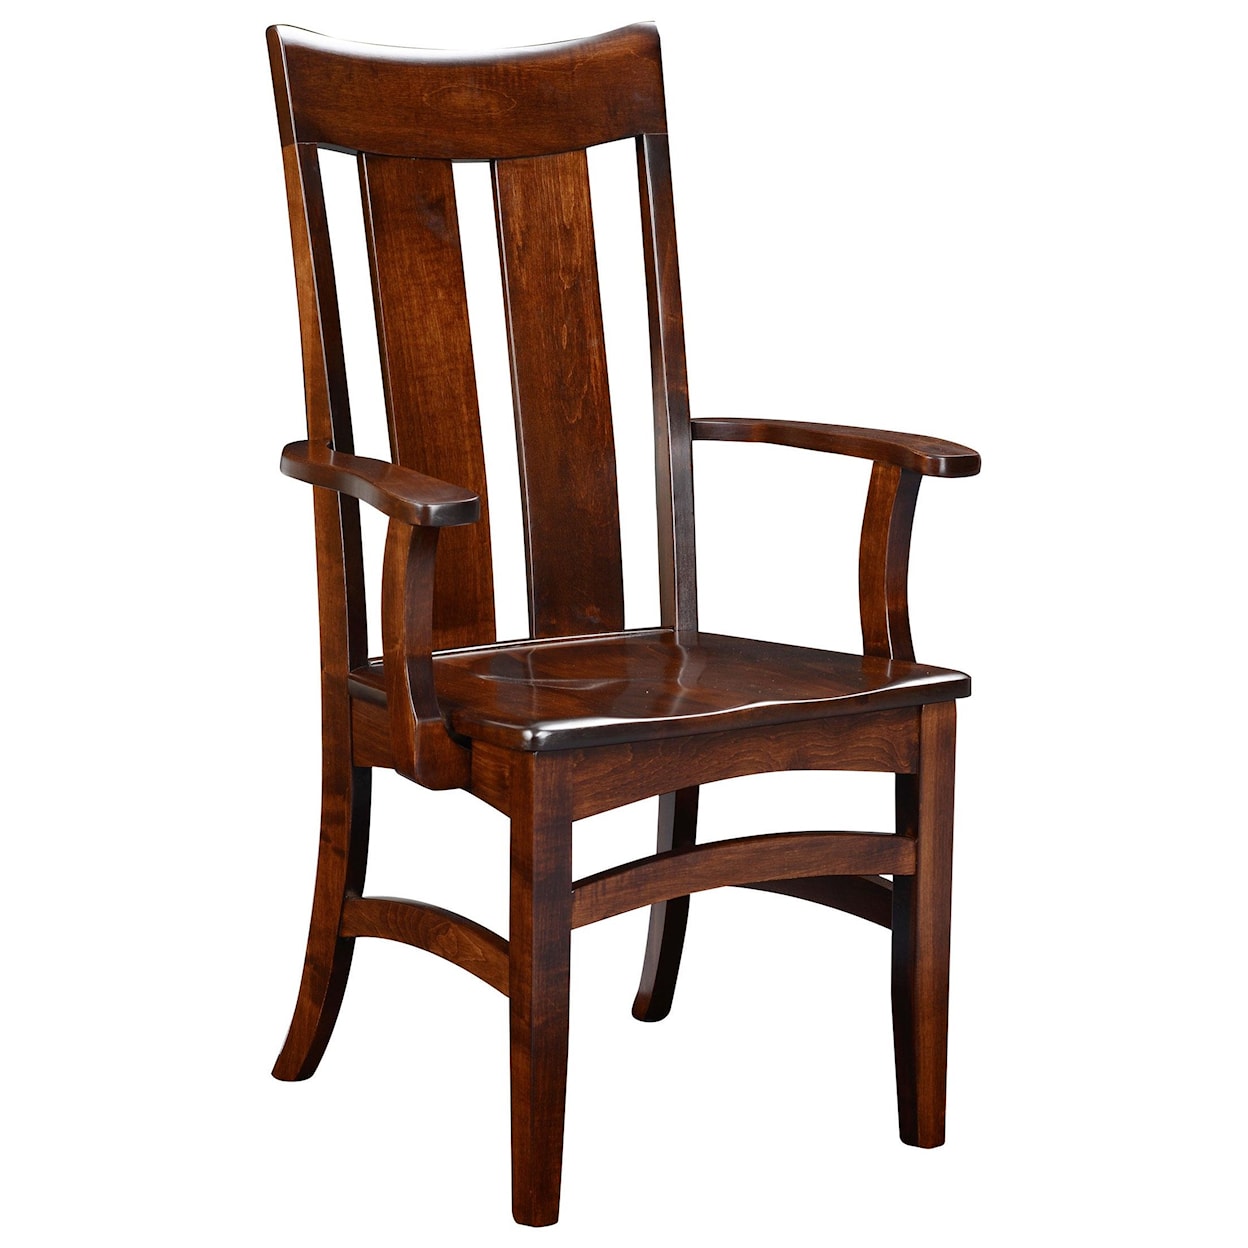 Wengerd Wood Products Galion Shaker Arm Chair